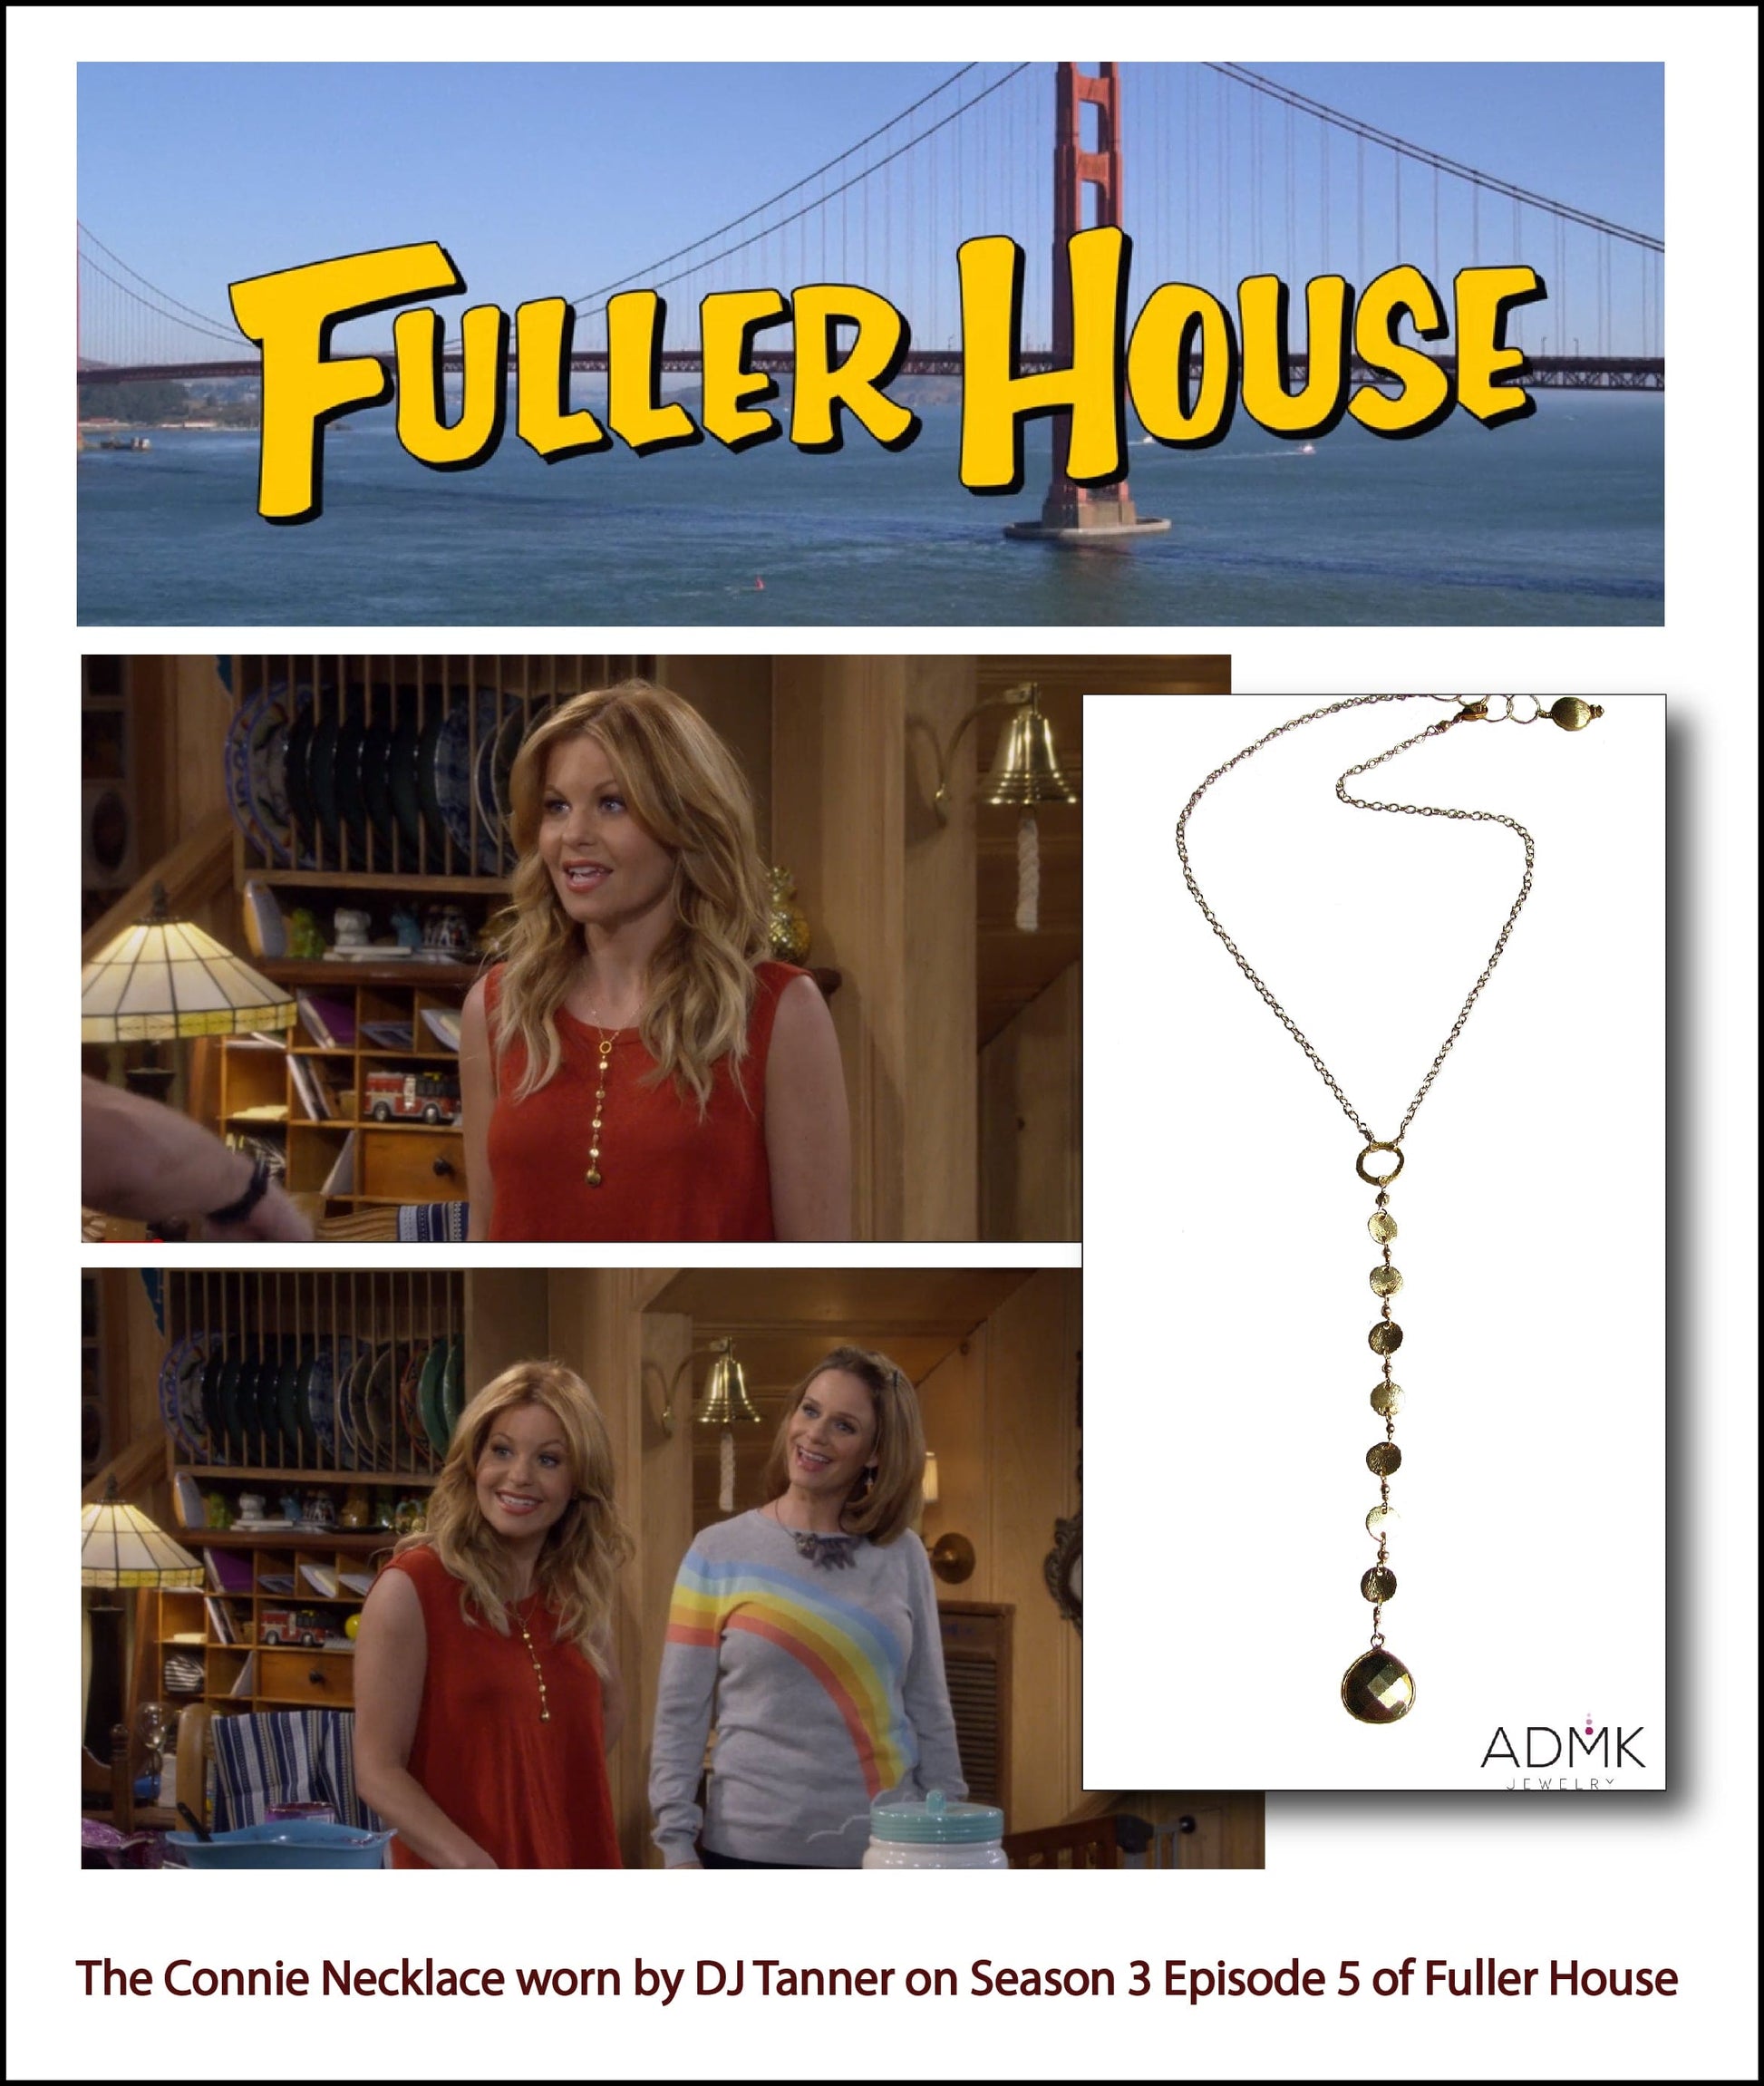 The Bonnie Necklace was worn by DJ Tanner from Fuller House